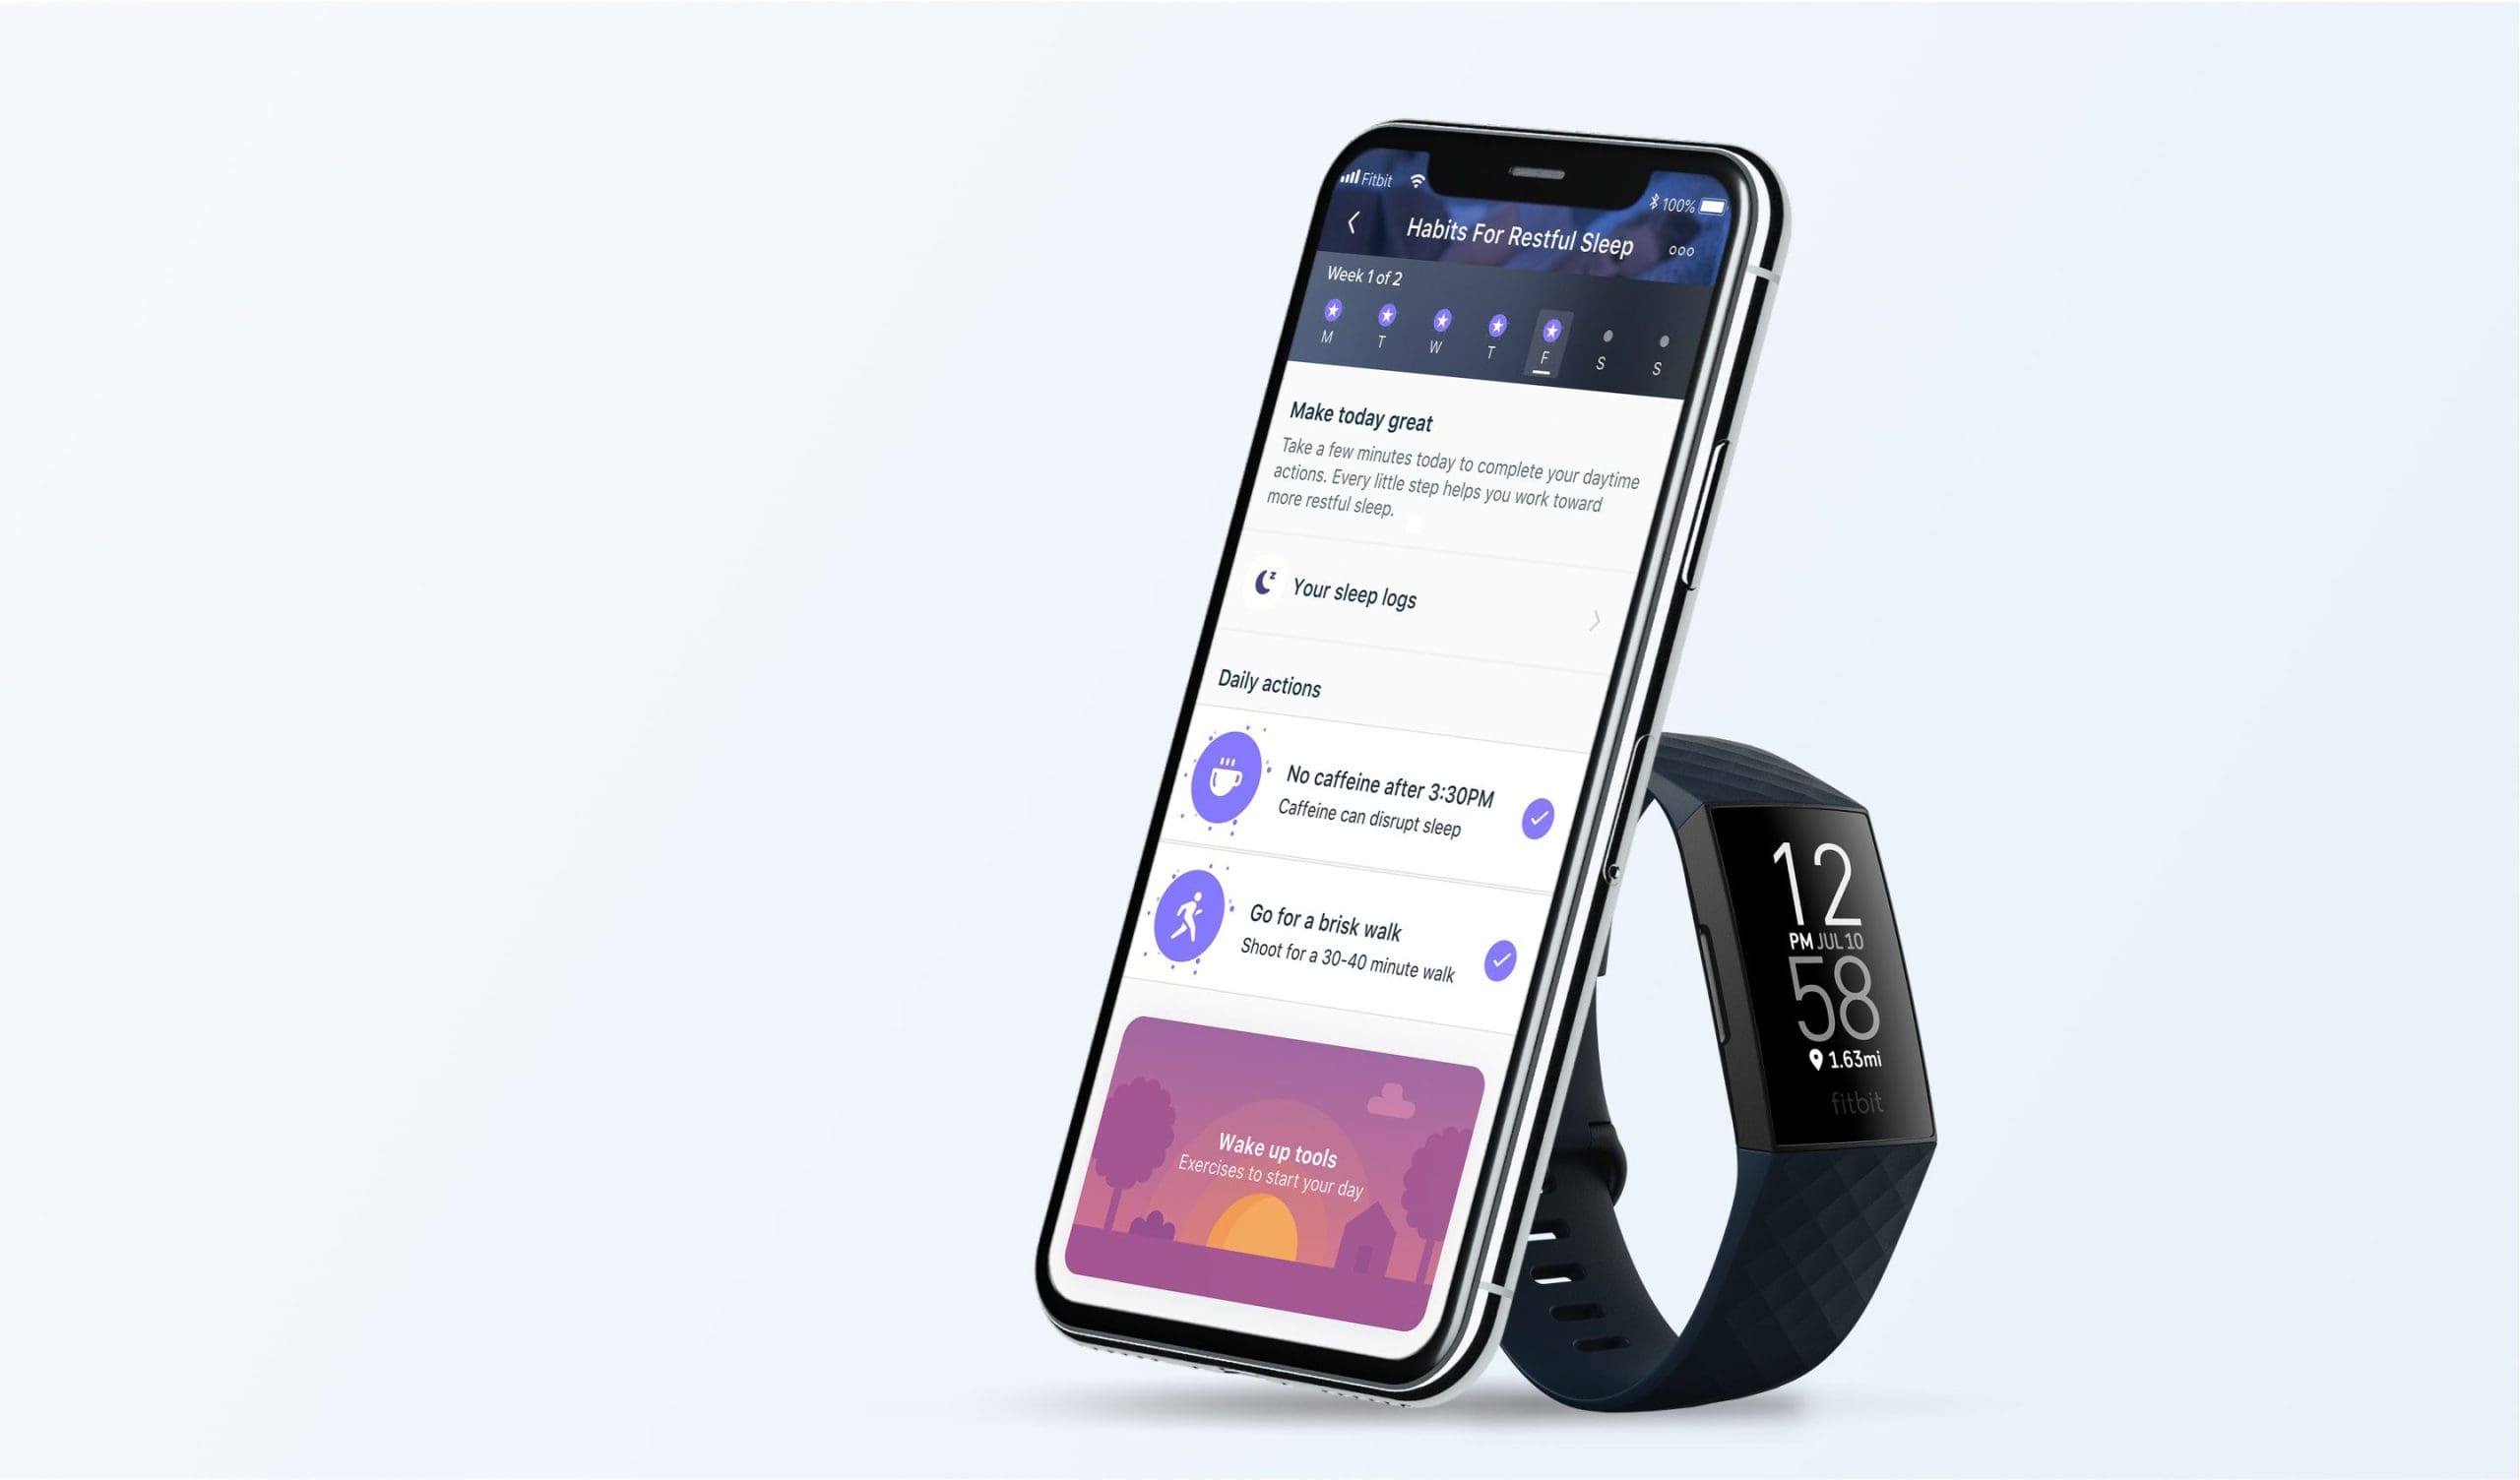 sign up fitbit